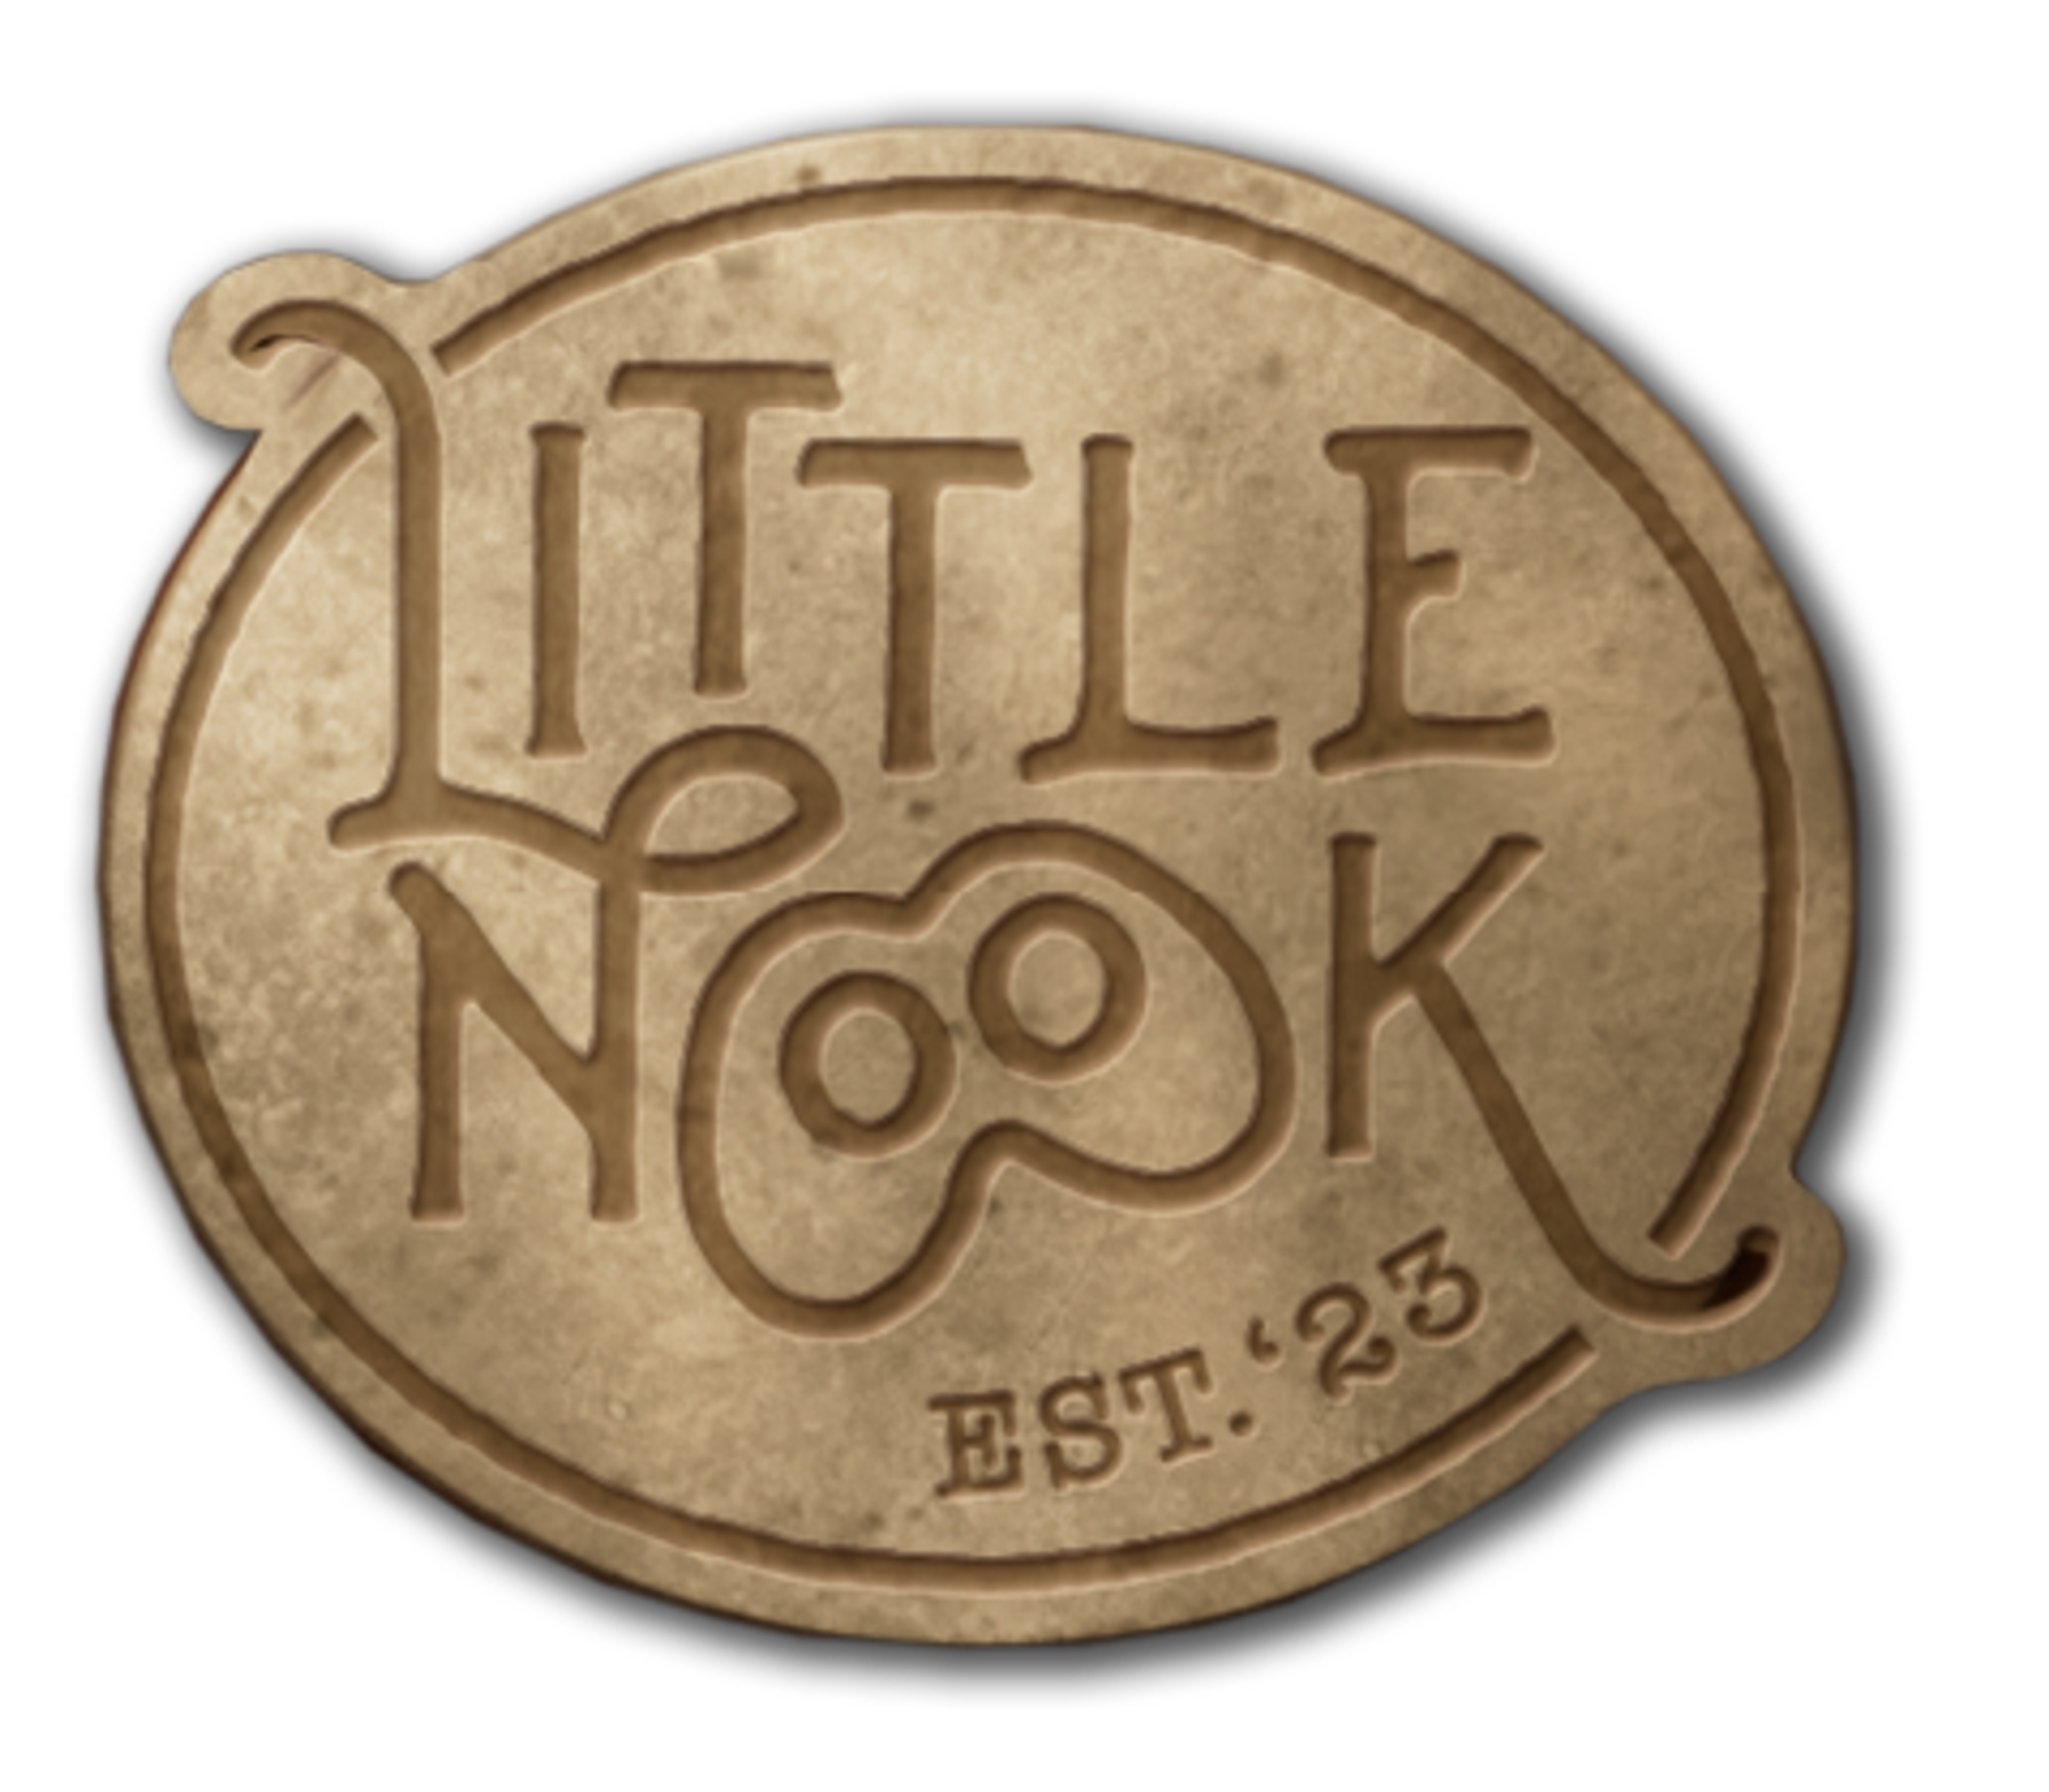 Little nook logo in gold and brass colours